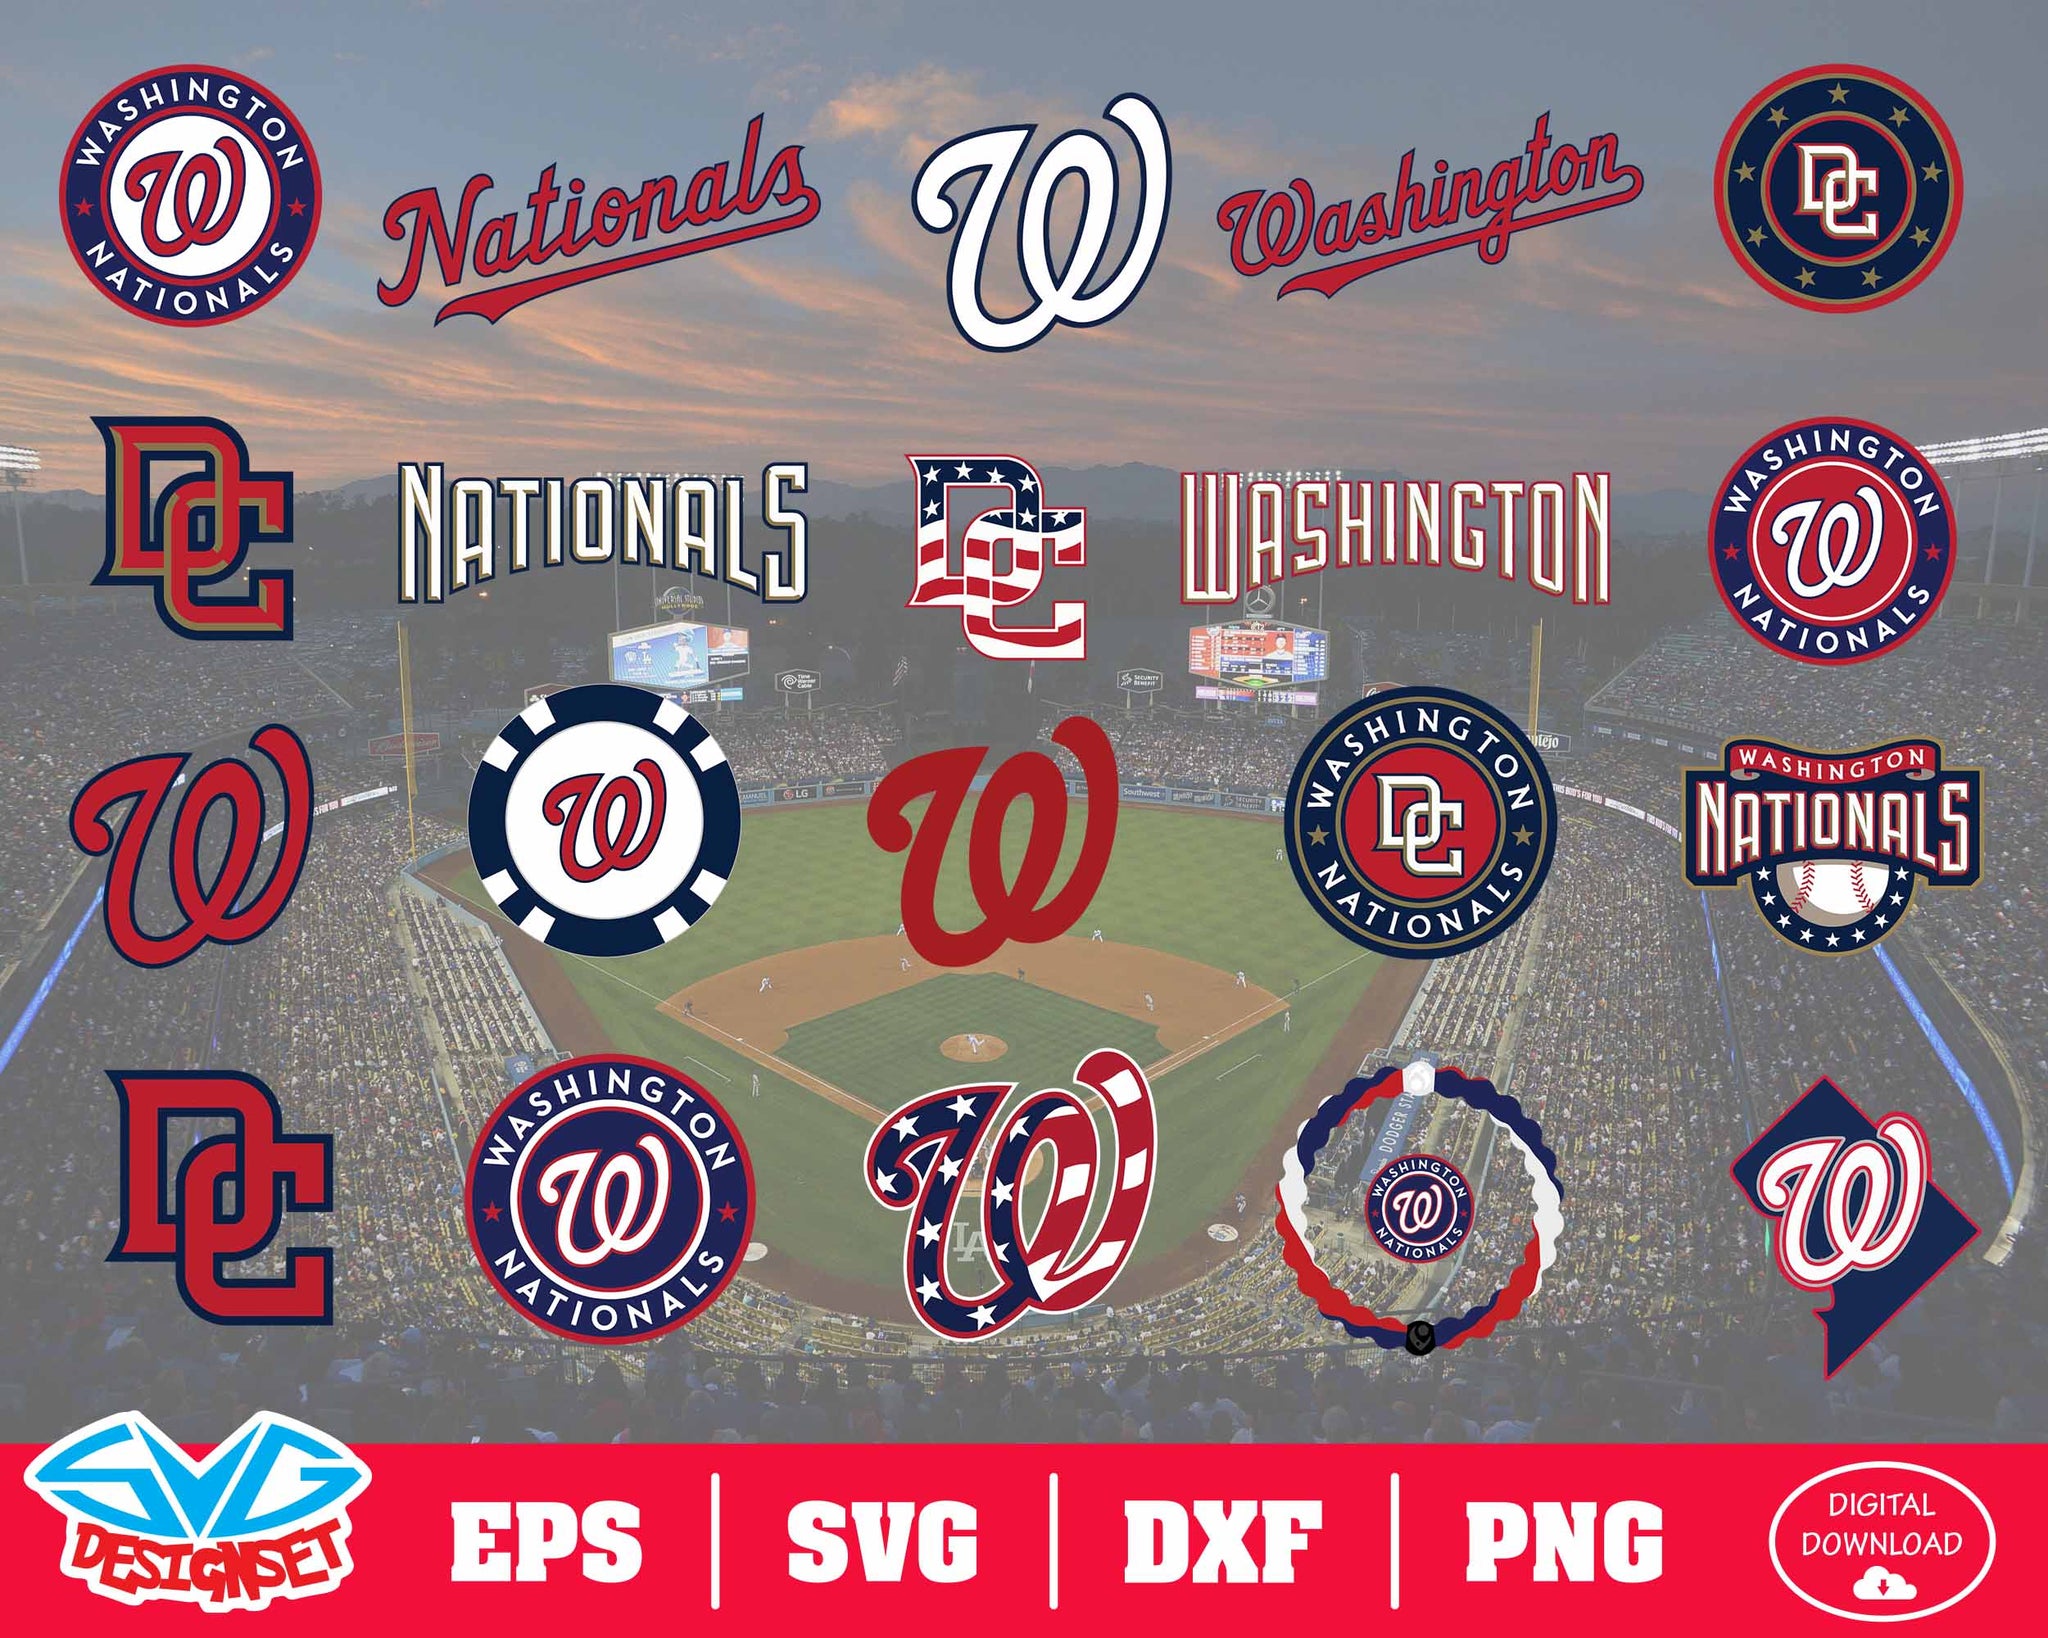 Washington Nations Team Svg, Dxf, Eps, Png, Clipart, Silhouette and Cutfiles - SVGDesignSets